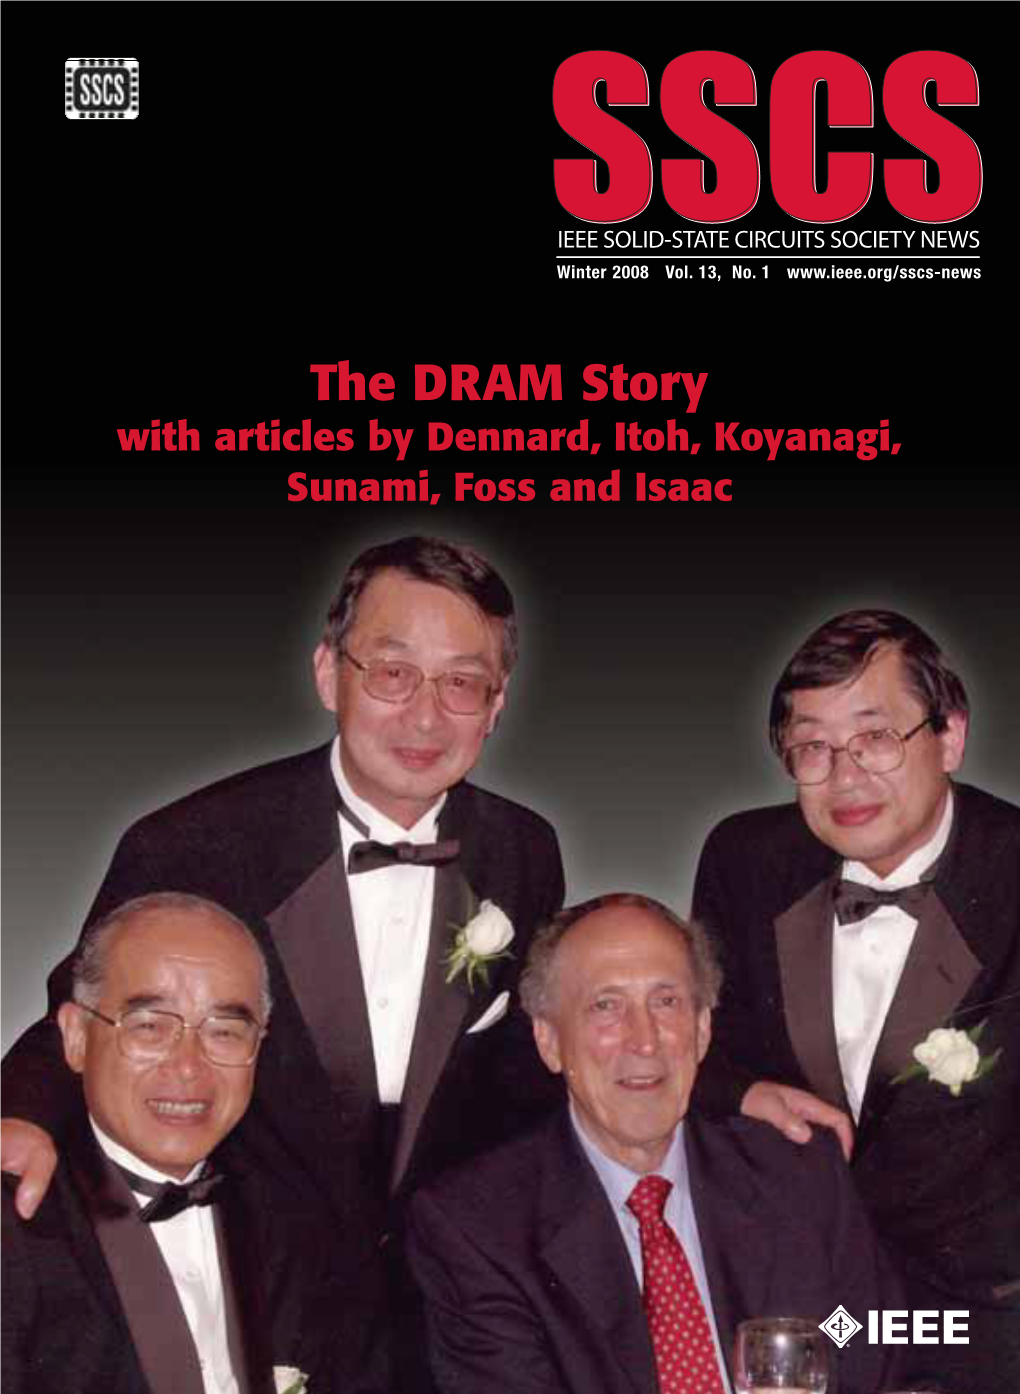 The DRAM Story with Articles by Dennard, Itoh, Koyanagi, Sunami, Foss and Isaac Sscs Nlwinter08 1/8/08 10:37 AM Page 2